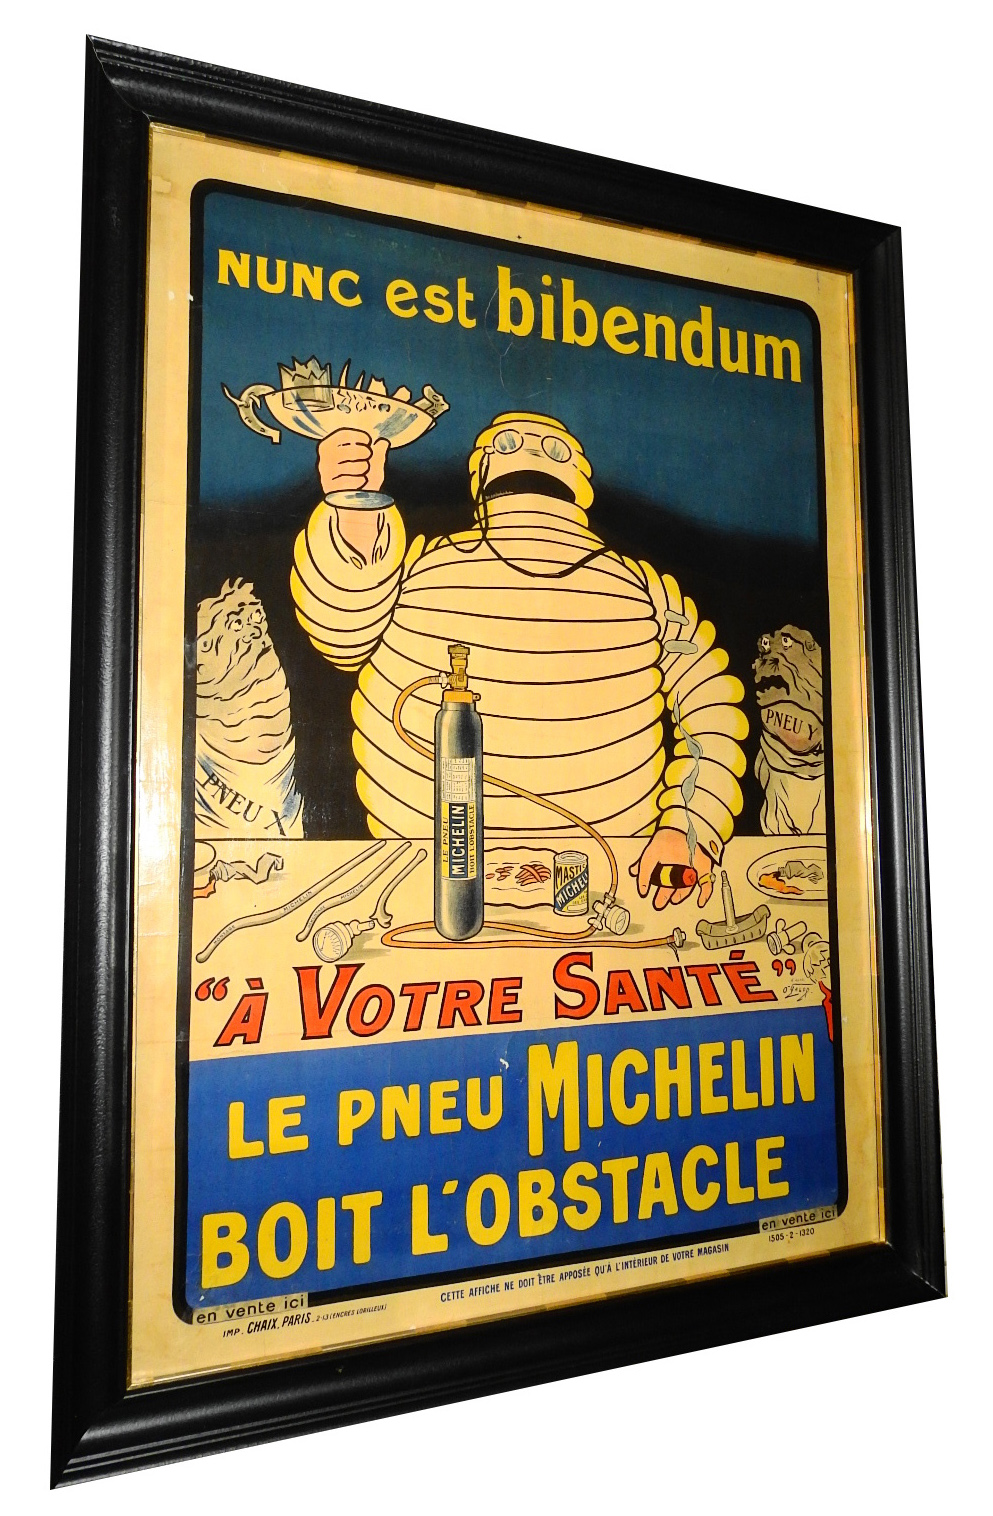 Michelin tyre Vintage advert  Poster art Print for Glass Frame 36" painting